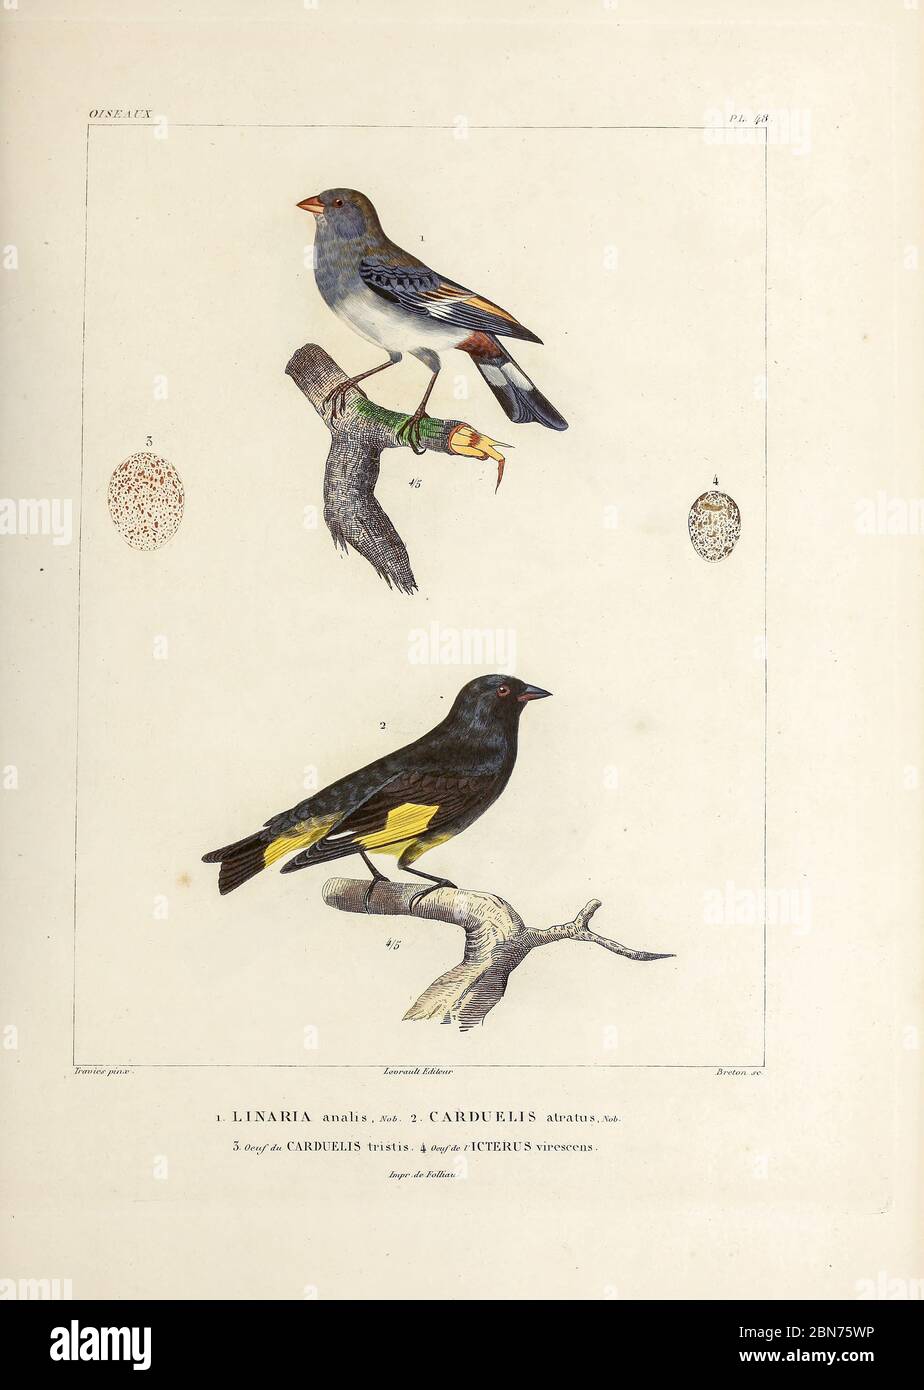 hand coloured sketch Top: Band-tailed Seedeater (Catamenia analis [Here as Linaria analis]) Bottom: black siskin (Spinus atratus [Here as Carduelis atratus]) From the book 'Voyage dans l'Amérique Méridionale' [Journey to South America: (Brazil, the eastern republic of Uruguay, the Argentine Republic, Patagonia, the republic of Chile, the republic of Bolivia, the republic of Peru), executed during the years 1826 - 1833] 4th volume Part 3 By: Orbigny, Alcide Dessalines d', d'Orbigny, 1802-1857; Montagne, Jean François Camille, 1784-1866; Martius, Karl Friedrich Philipp von, 1794-1868 Published Stock Photo